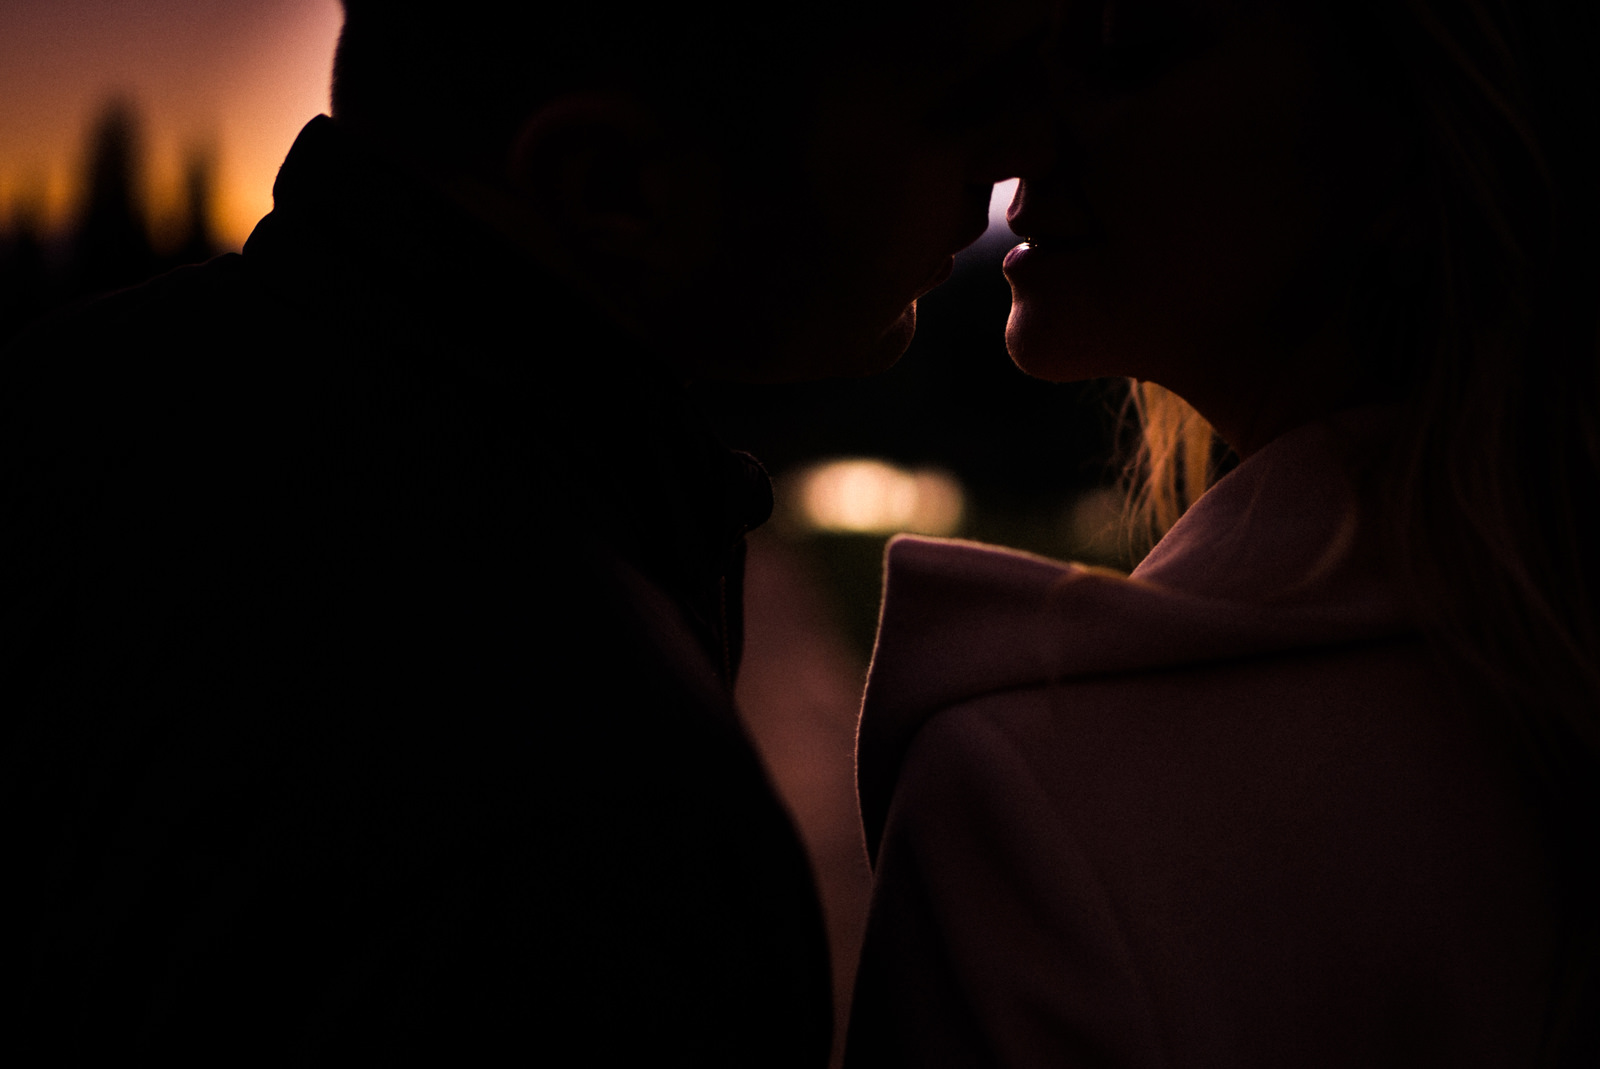 031-romantic-moody-engagement-session-photo-by-best-seattle-wedding-photographer.jpg